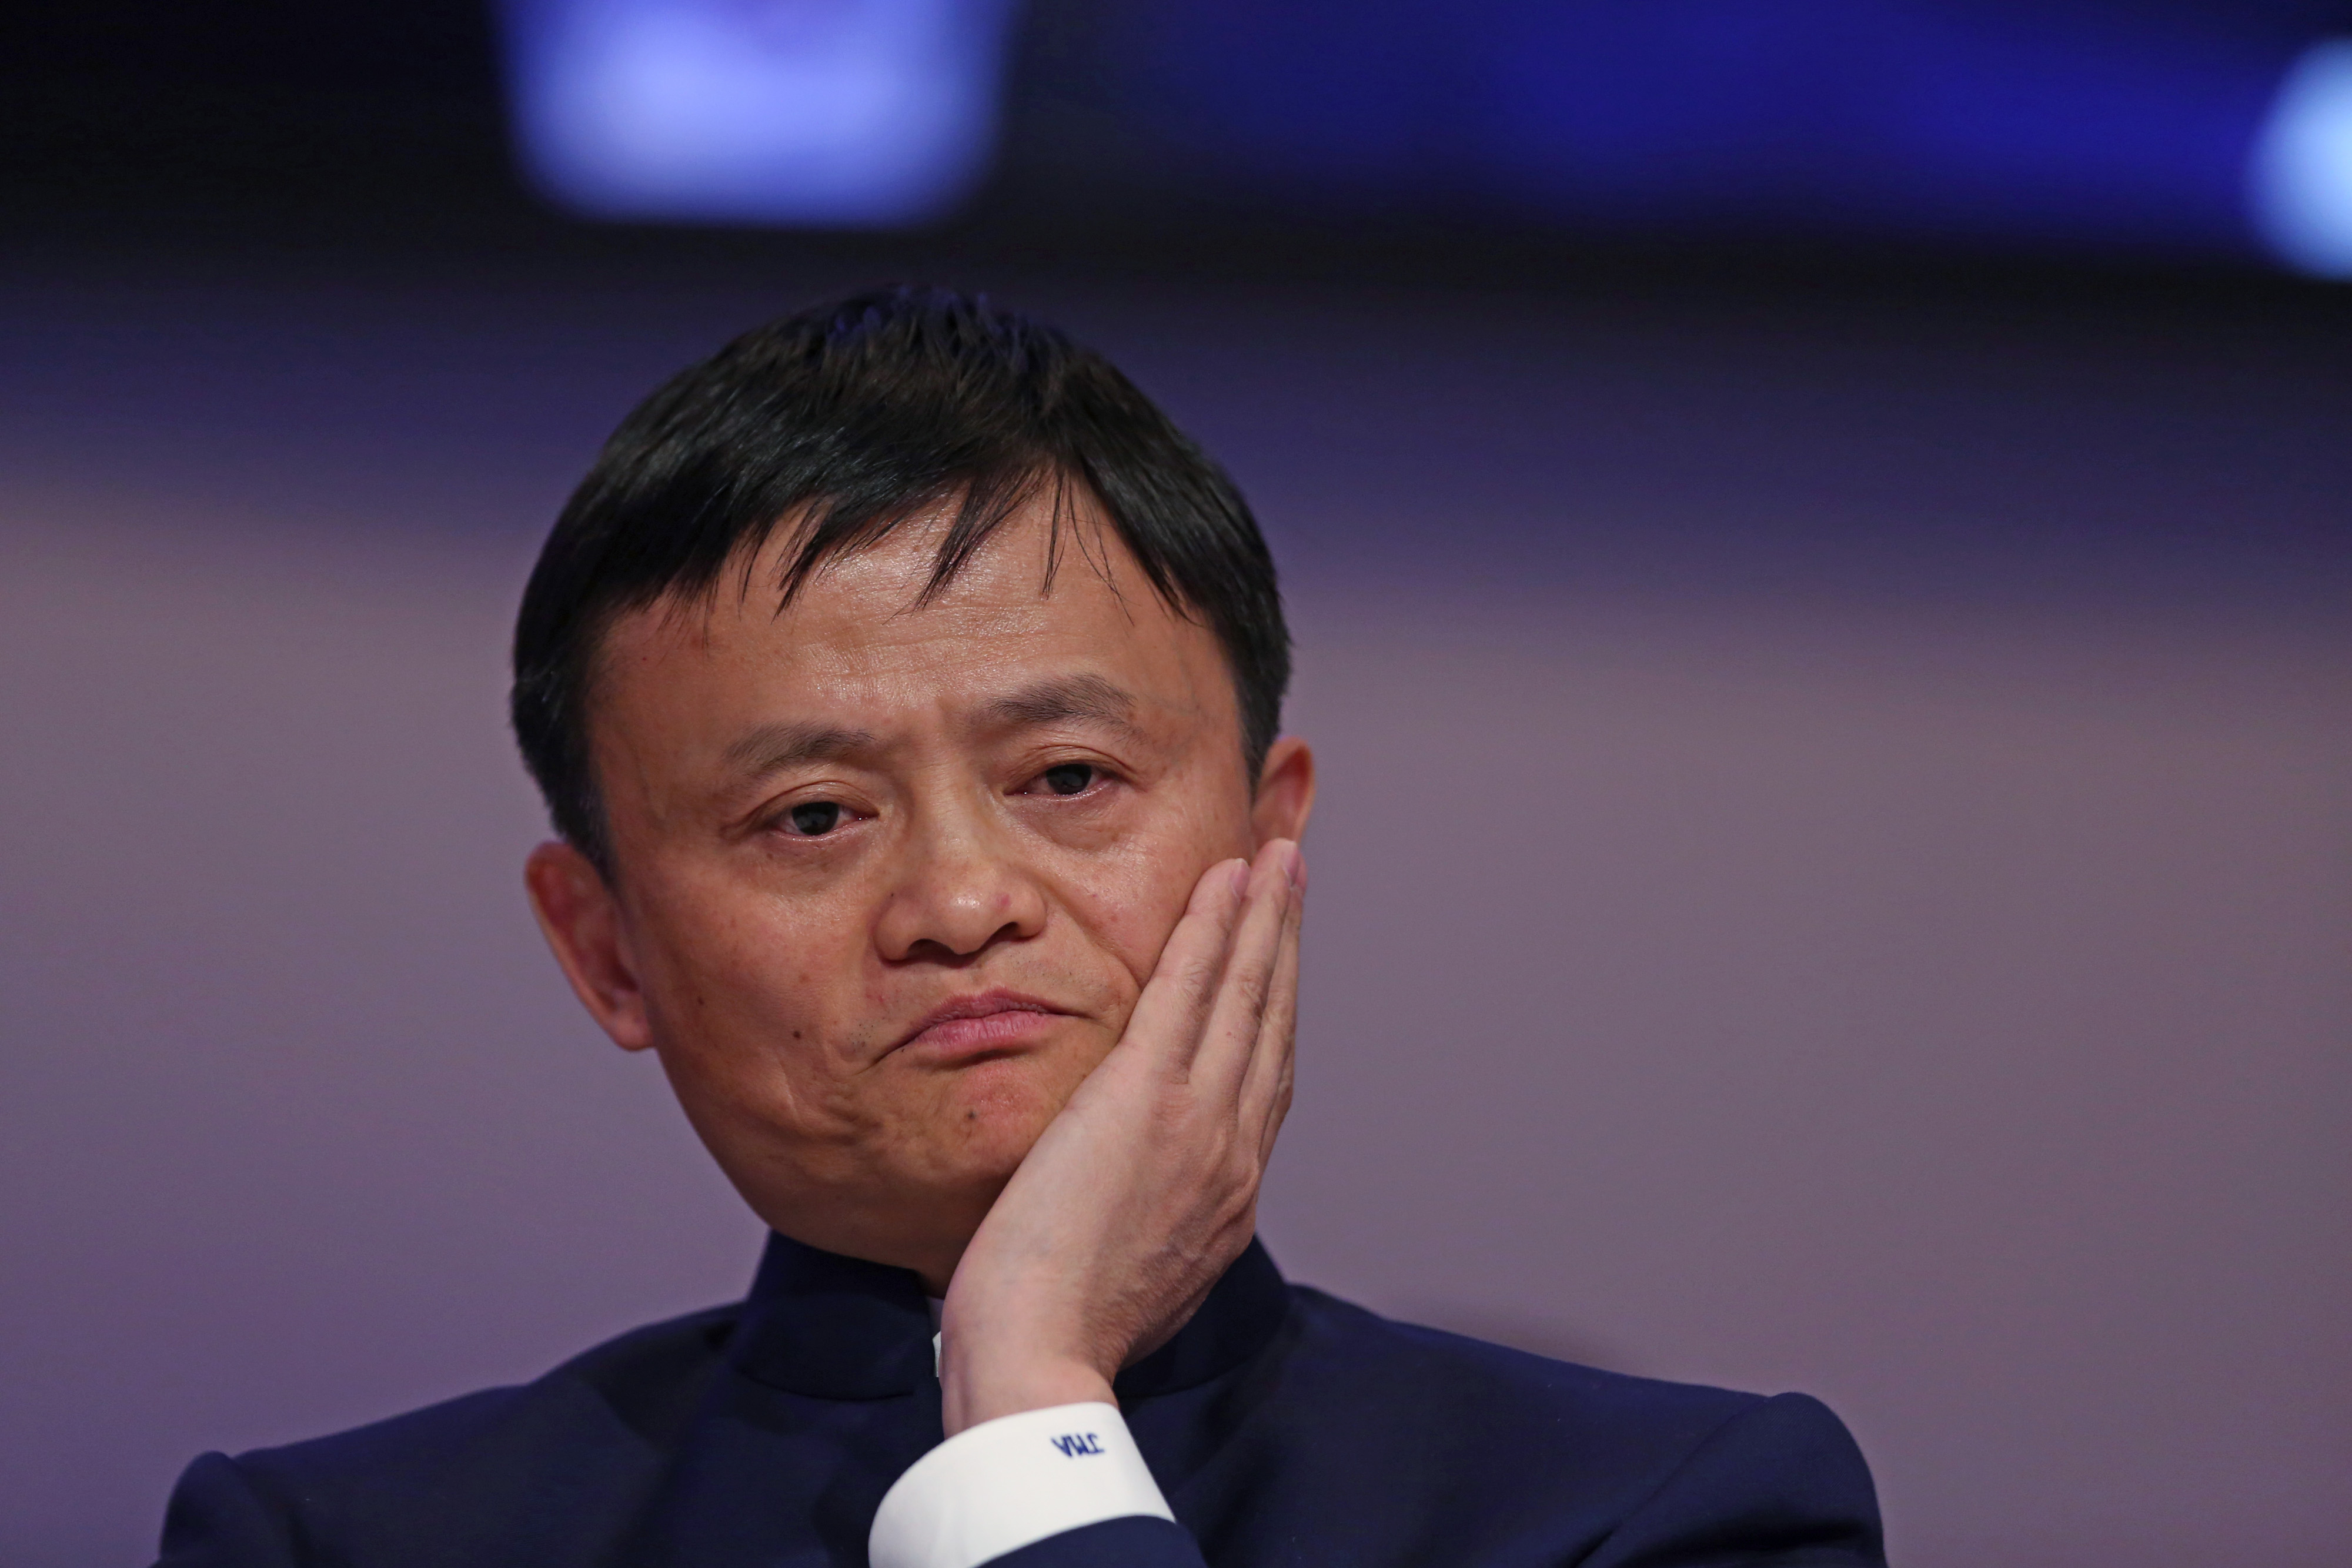 Jack Ma, billionaire and chairman of Alibaba Group Holding Ltd., during the World Economic Forum in Davos, Switzerland on Jan. 23, 2015. (Bloomberg—Bloomberg via Getty Images)